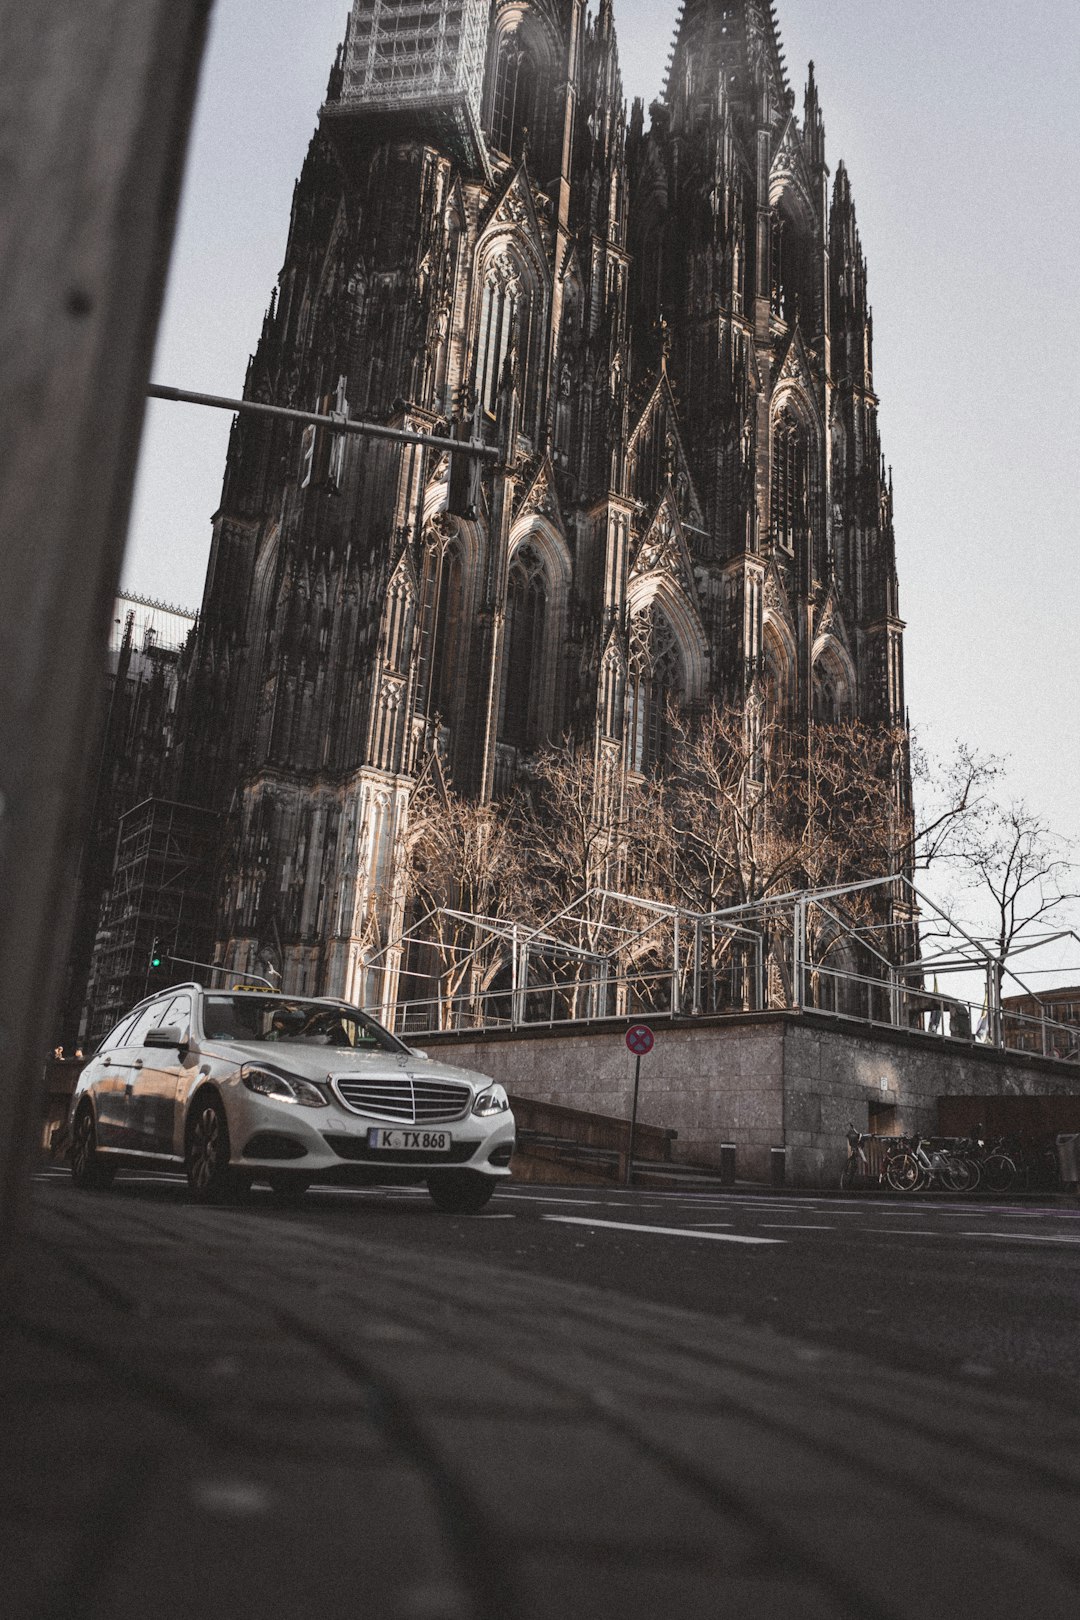 Travel Tips and Stories of Cologne in Germany